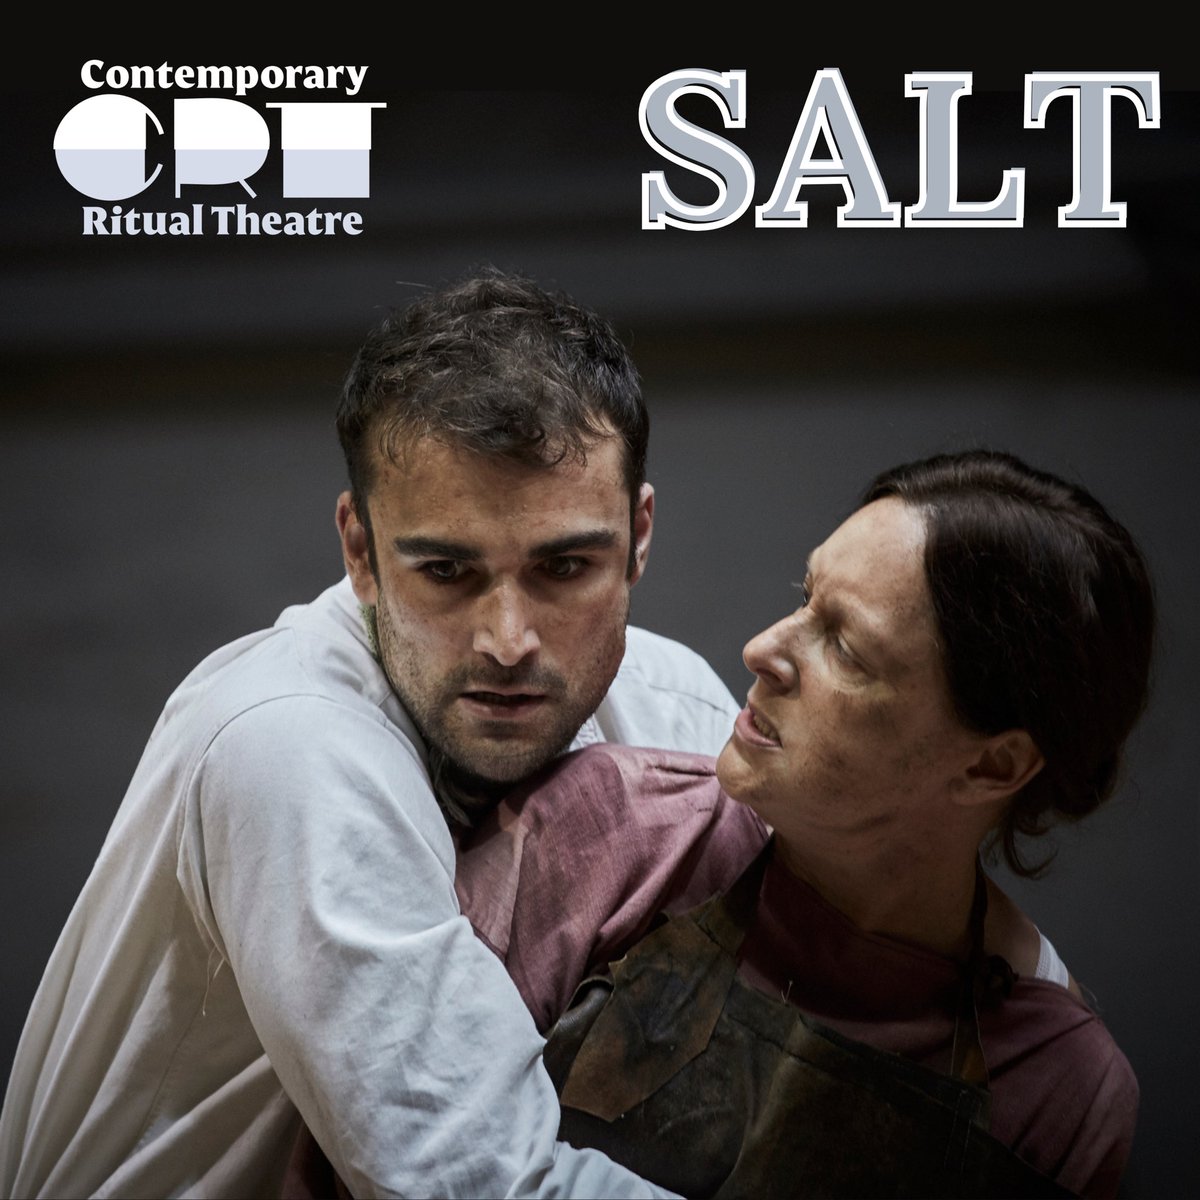 ‘I’m goin’ out wi’ th’ Tide, old wench;
I came in on the Flood.
An’ the Sea is streaked wi’ Silver,
An’ the Sun is red wi’ Blood.’

SALT. The first theatre event of its kind. Coming May - June 2024.

#SALT #SaltPlay #ContemporaryRitual #RitualTheatre #MadeinYarmouth #OutThereArts